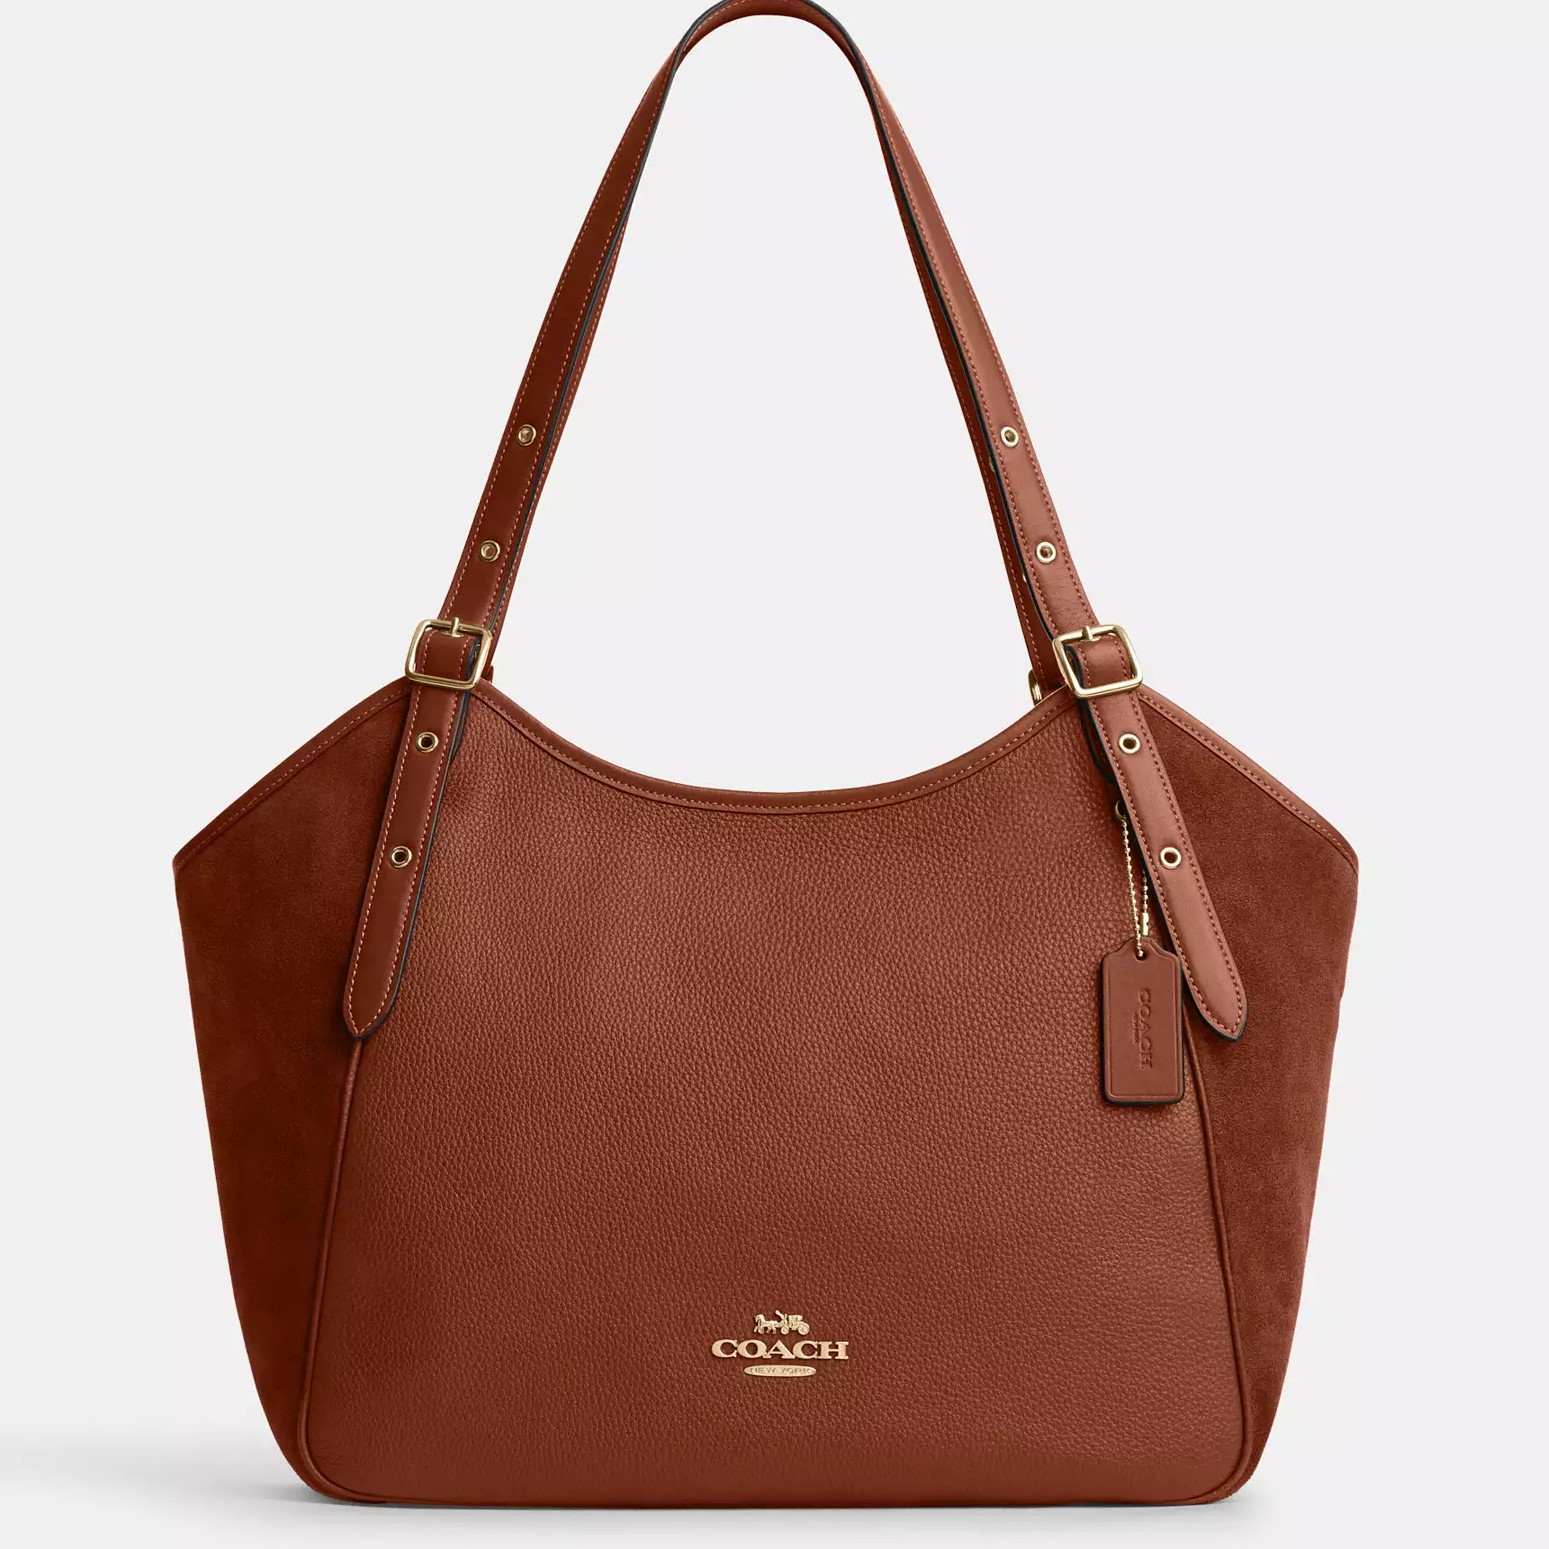 TÚI COACH NỮ MEADOW SHOULDER BAG SUEDE AND REFINED PEBBLE LEATHER REDWOOD CM075 1